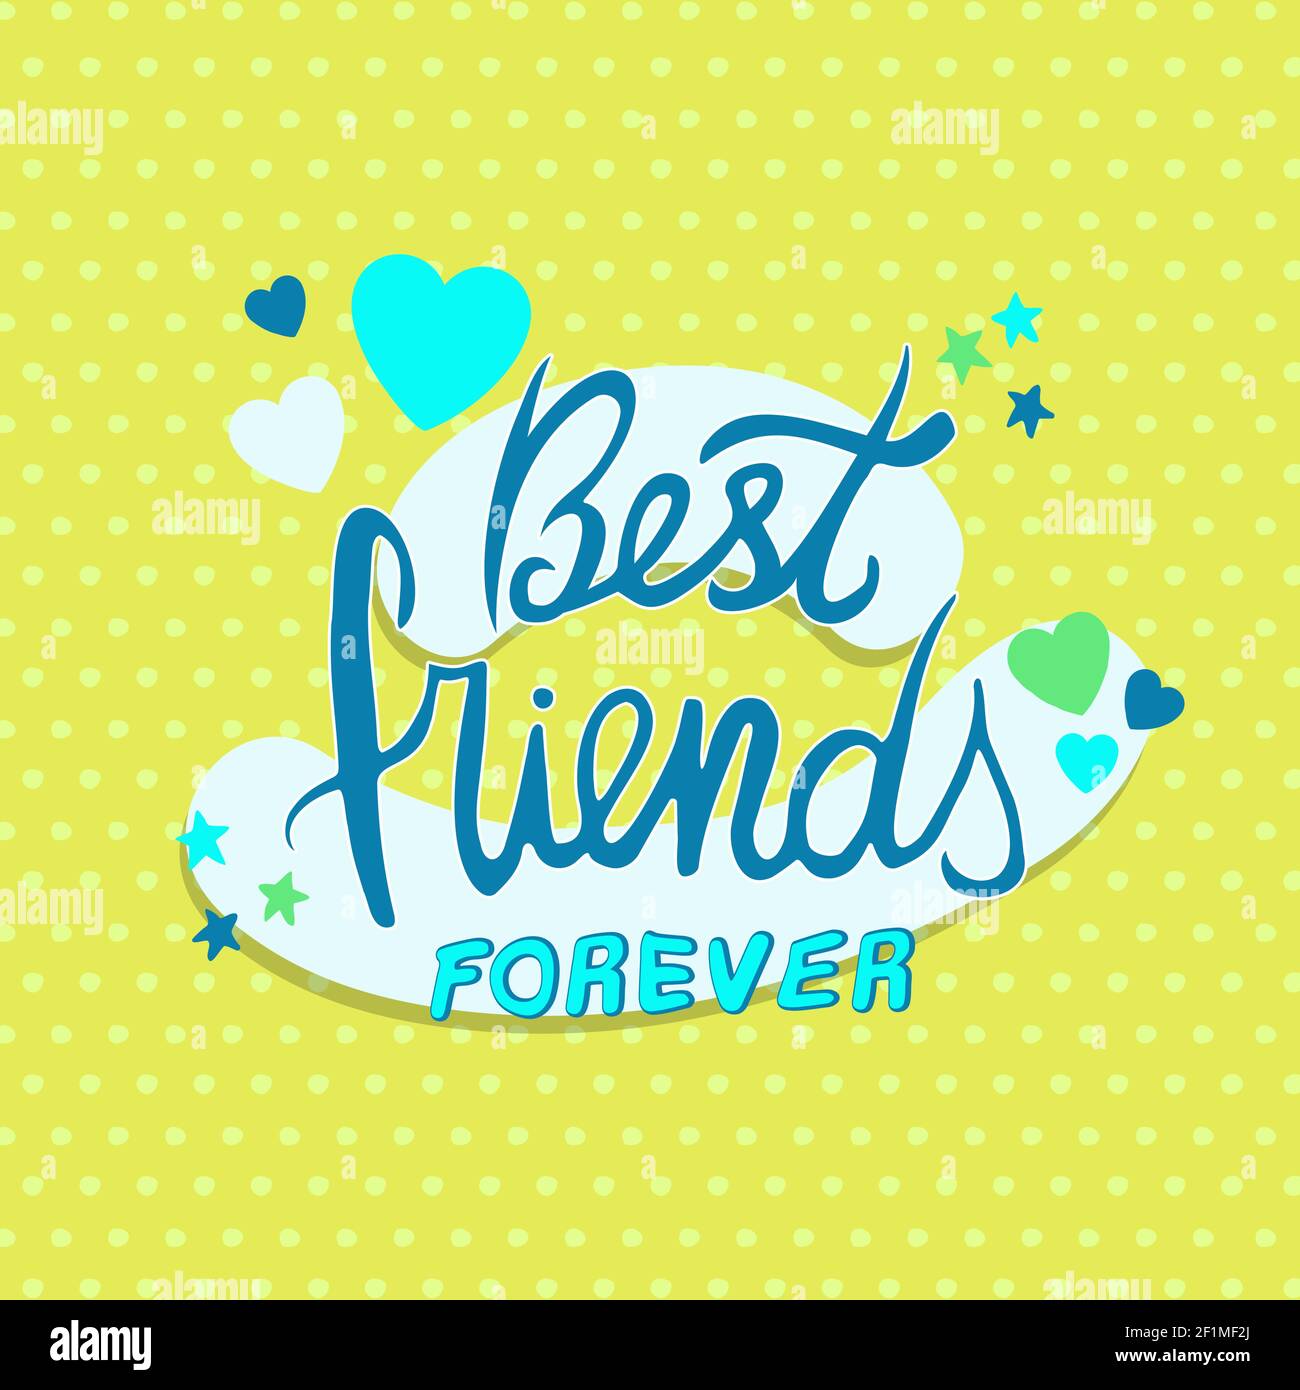 Friendship day greeting card illustration of cute best friends ...